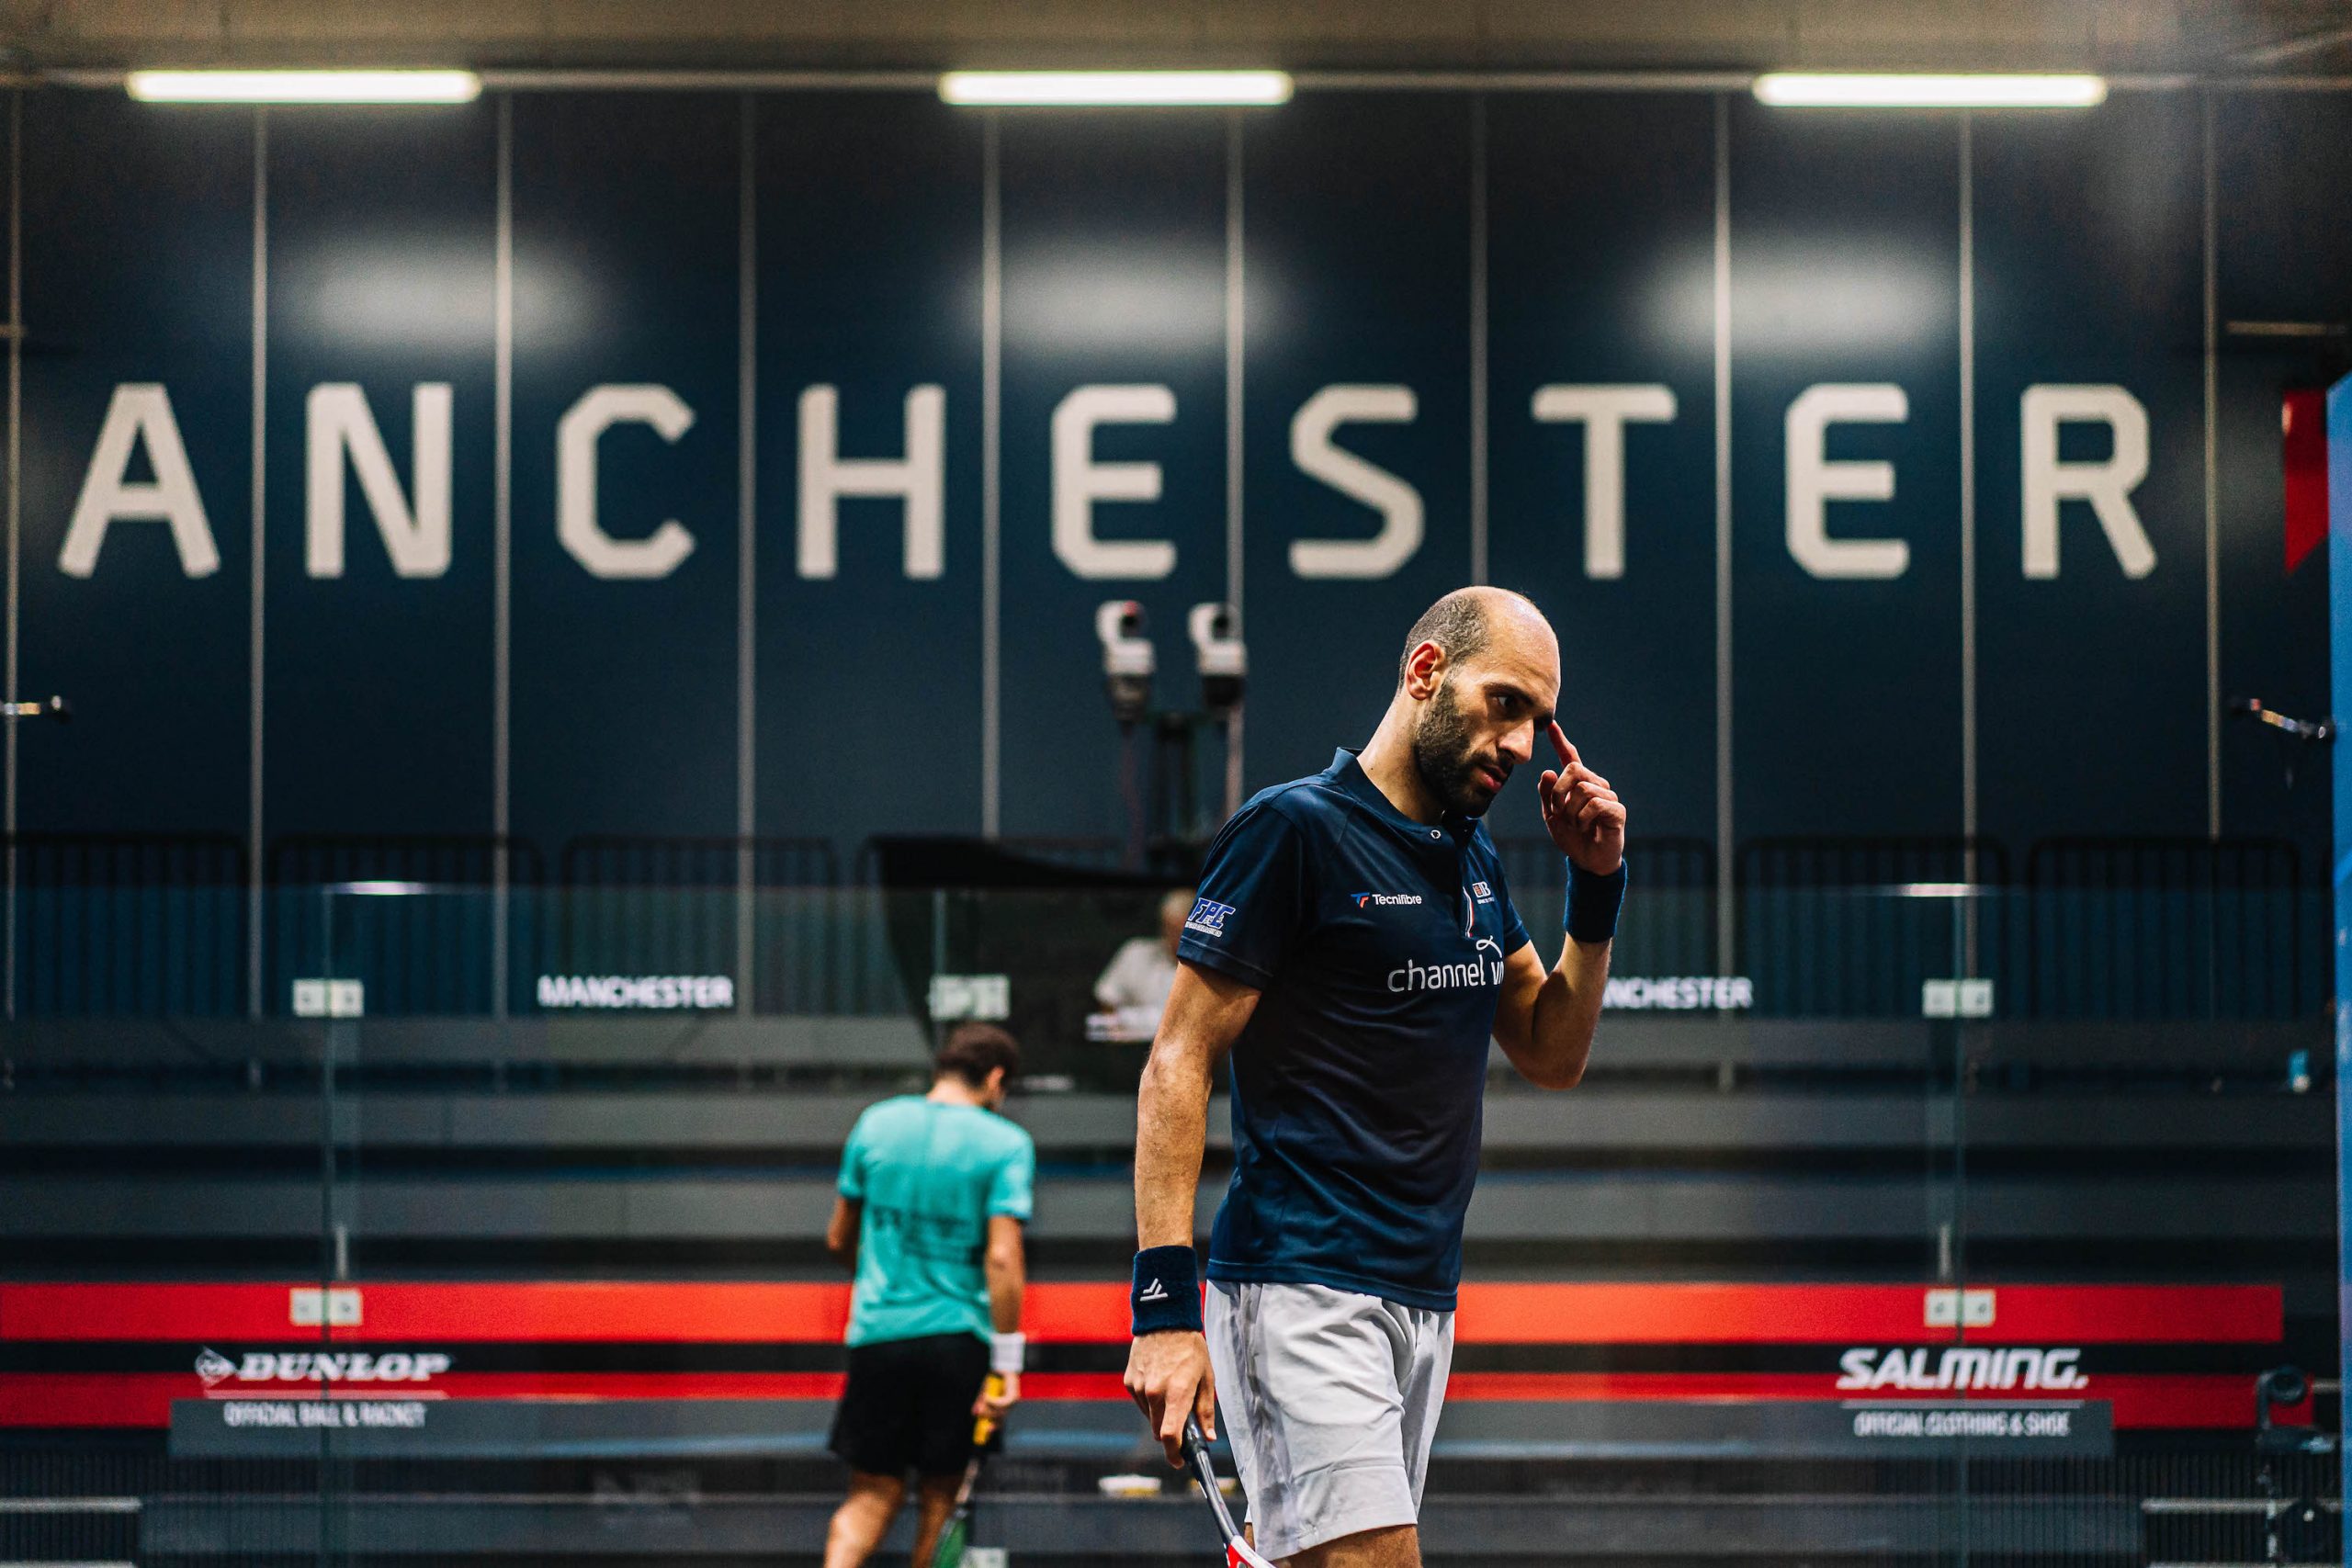 How & Where to Watch the Manchester Open Live Manchester Open Squash